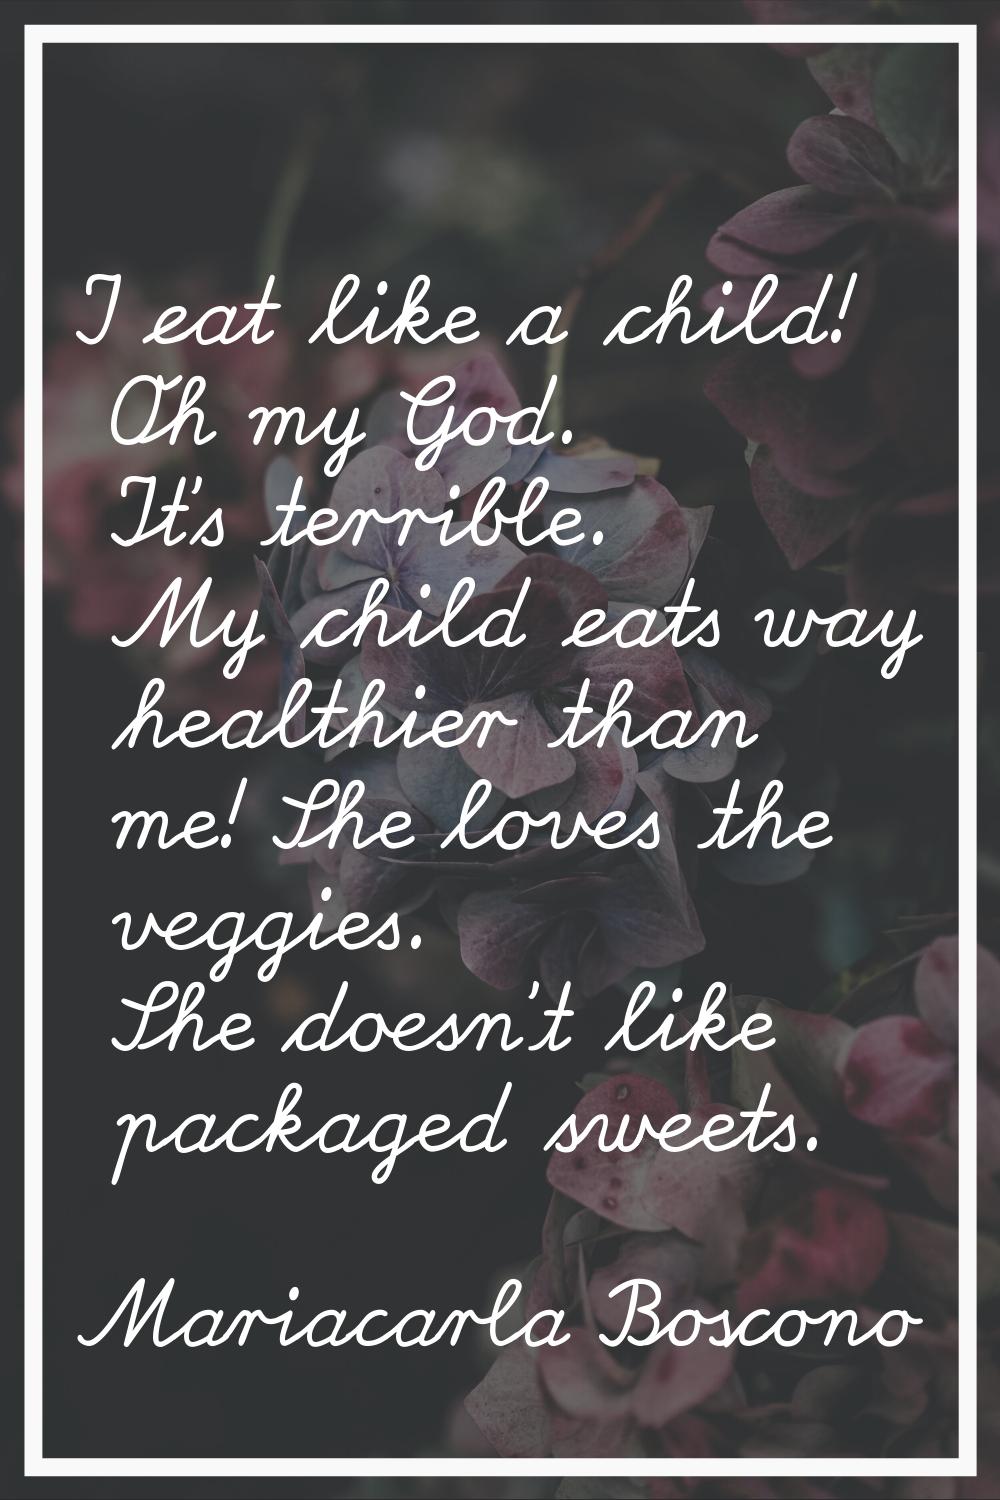 I eat like a child! Oh my God. It's terrible. My child eats way healthier than me! She loves the ve